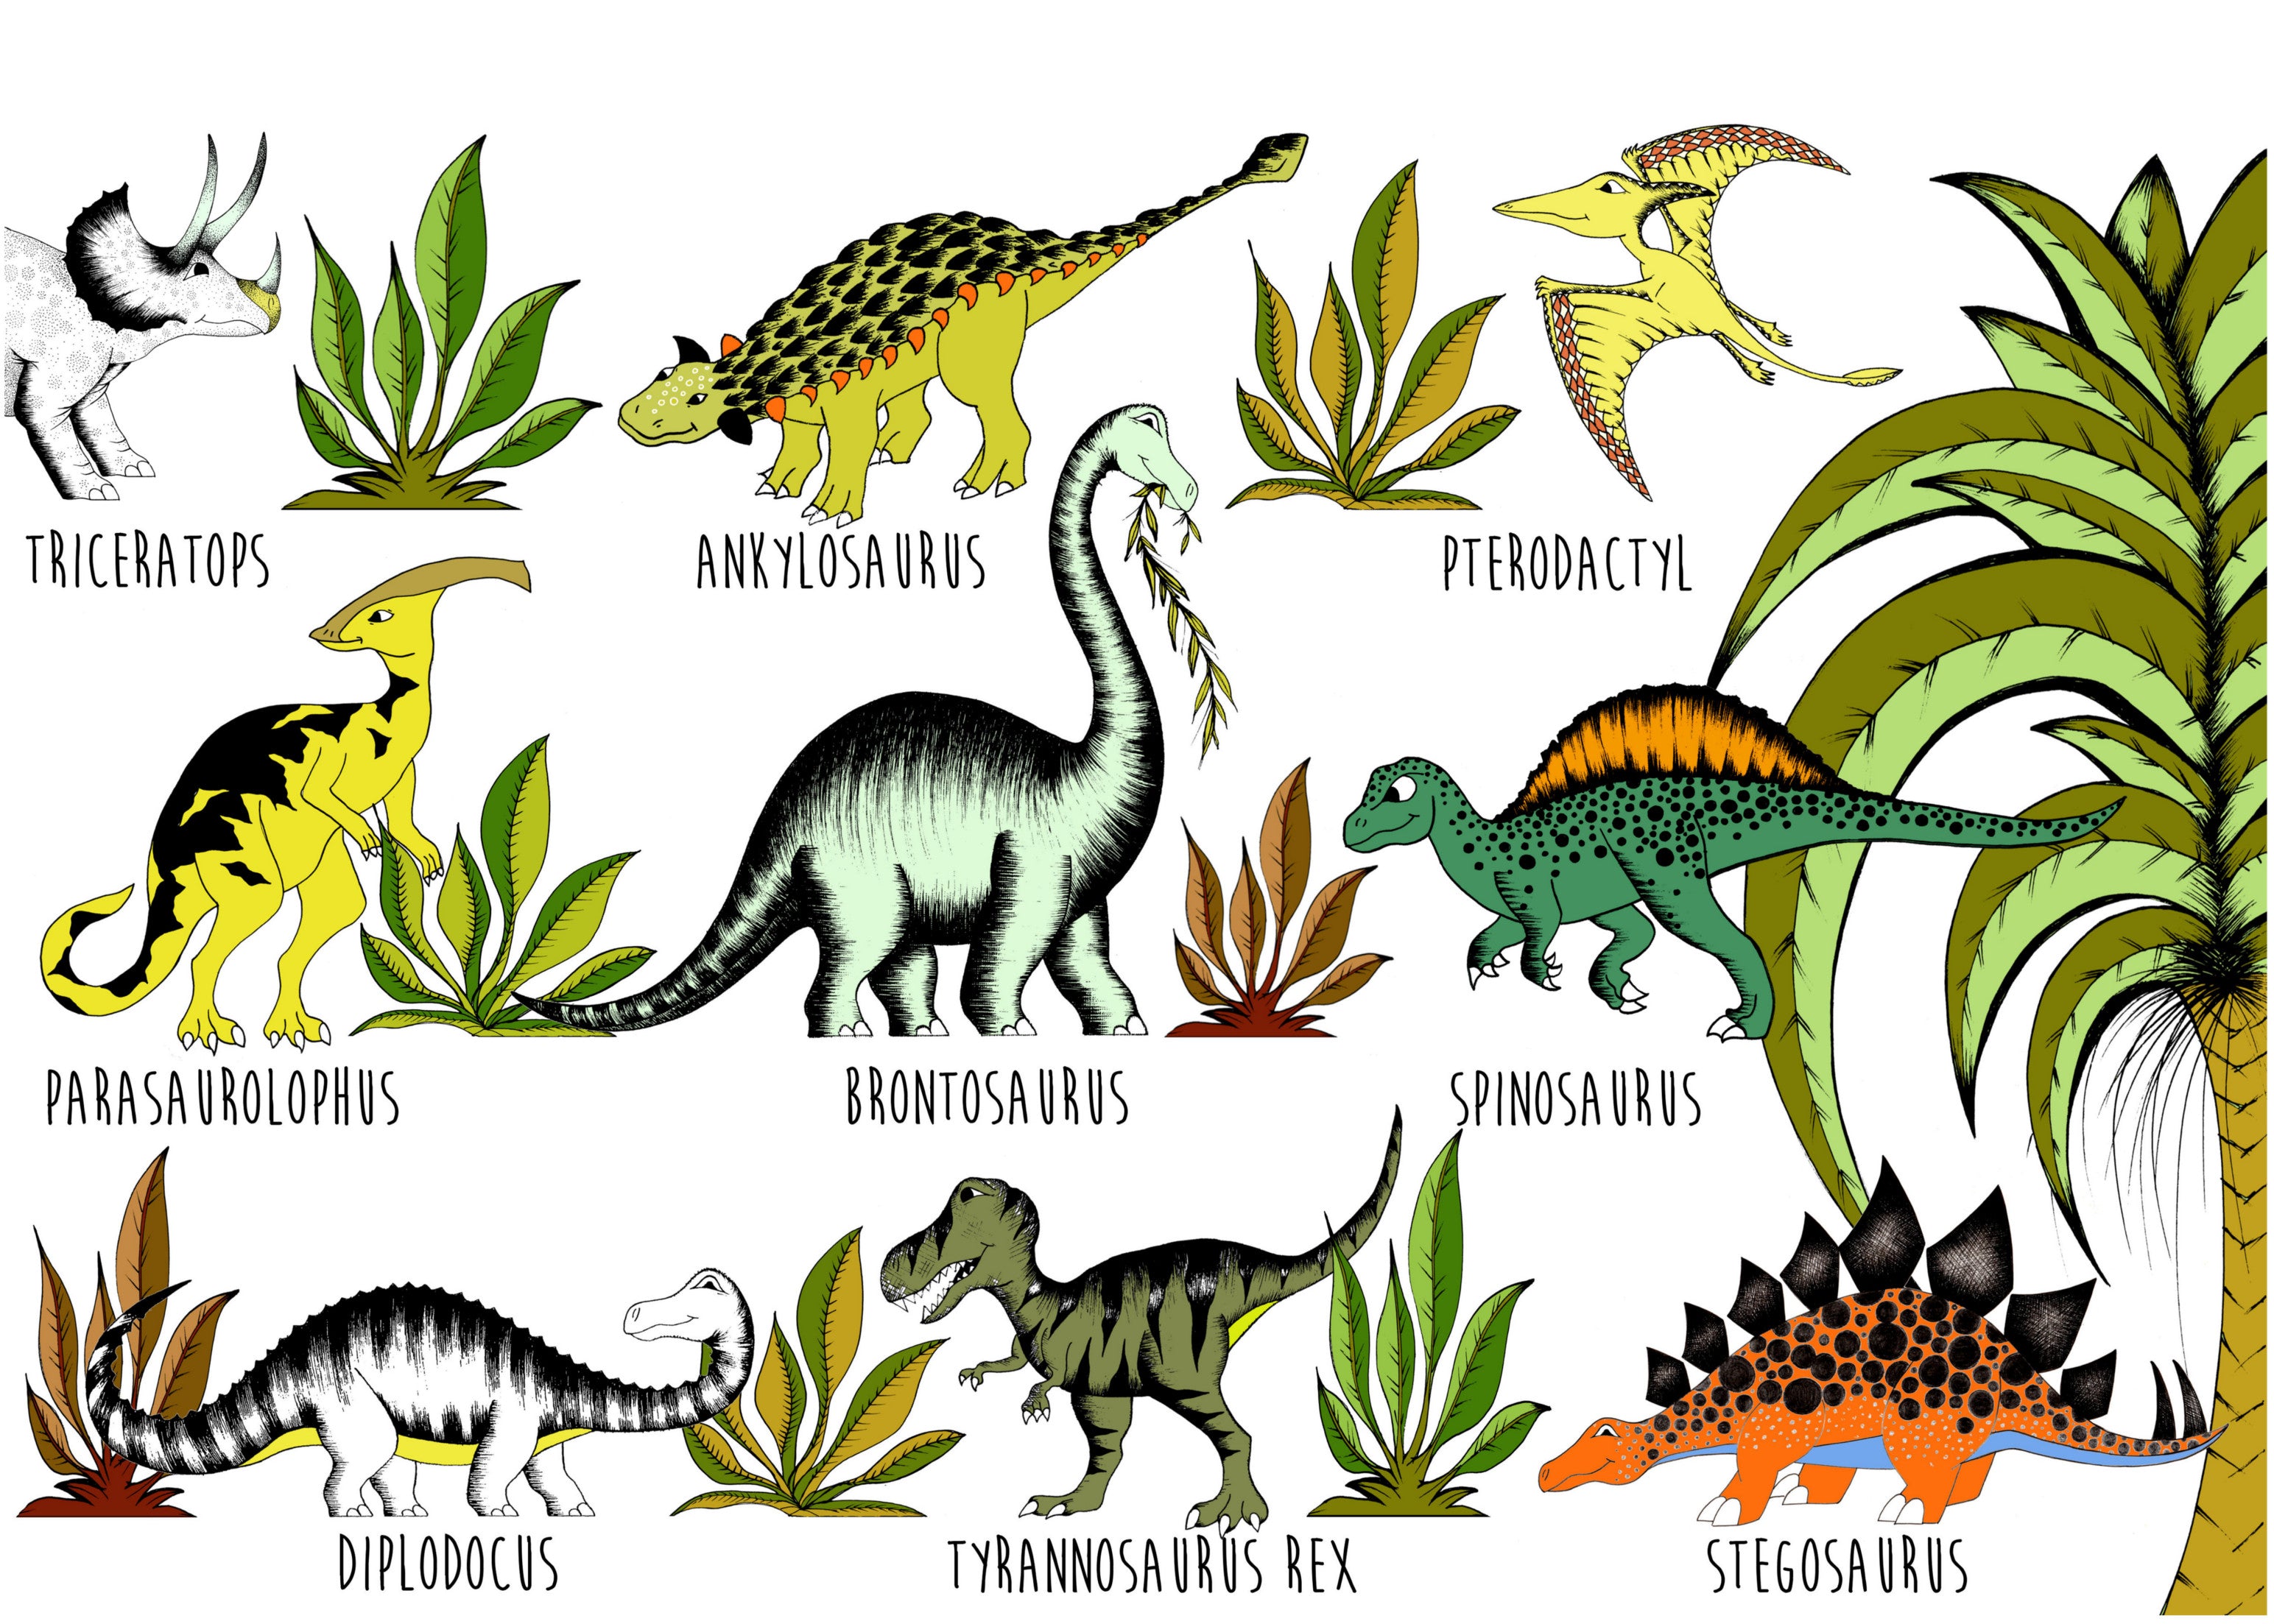 dinosaur chart with names